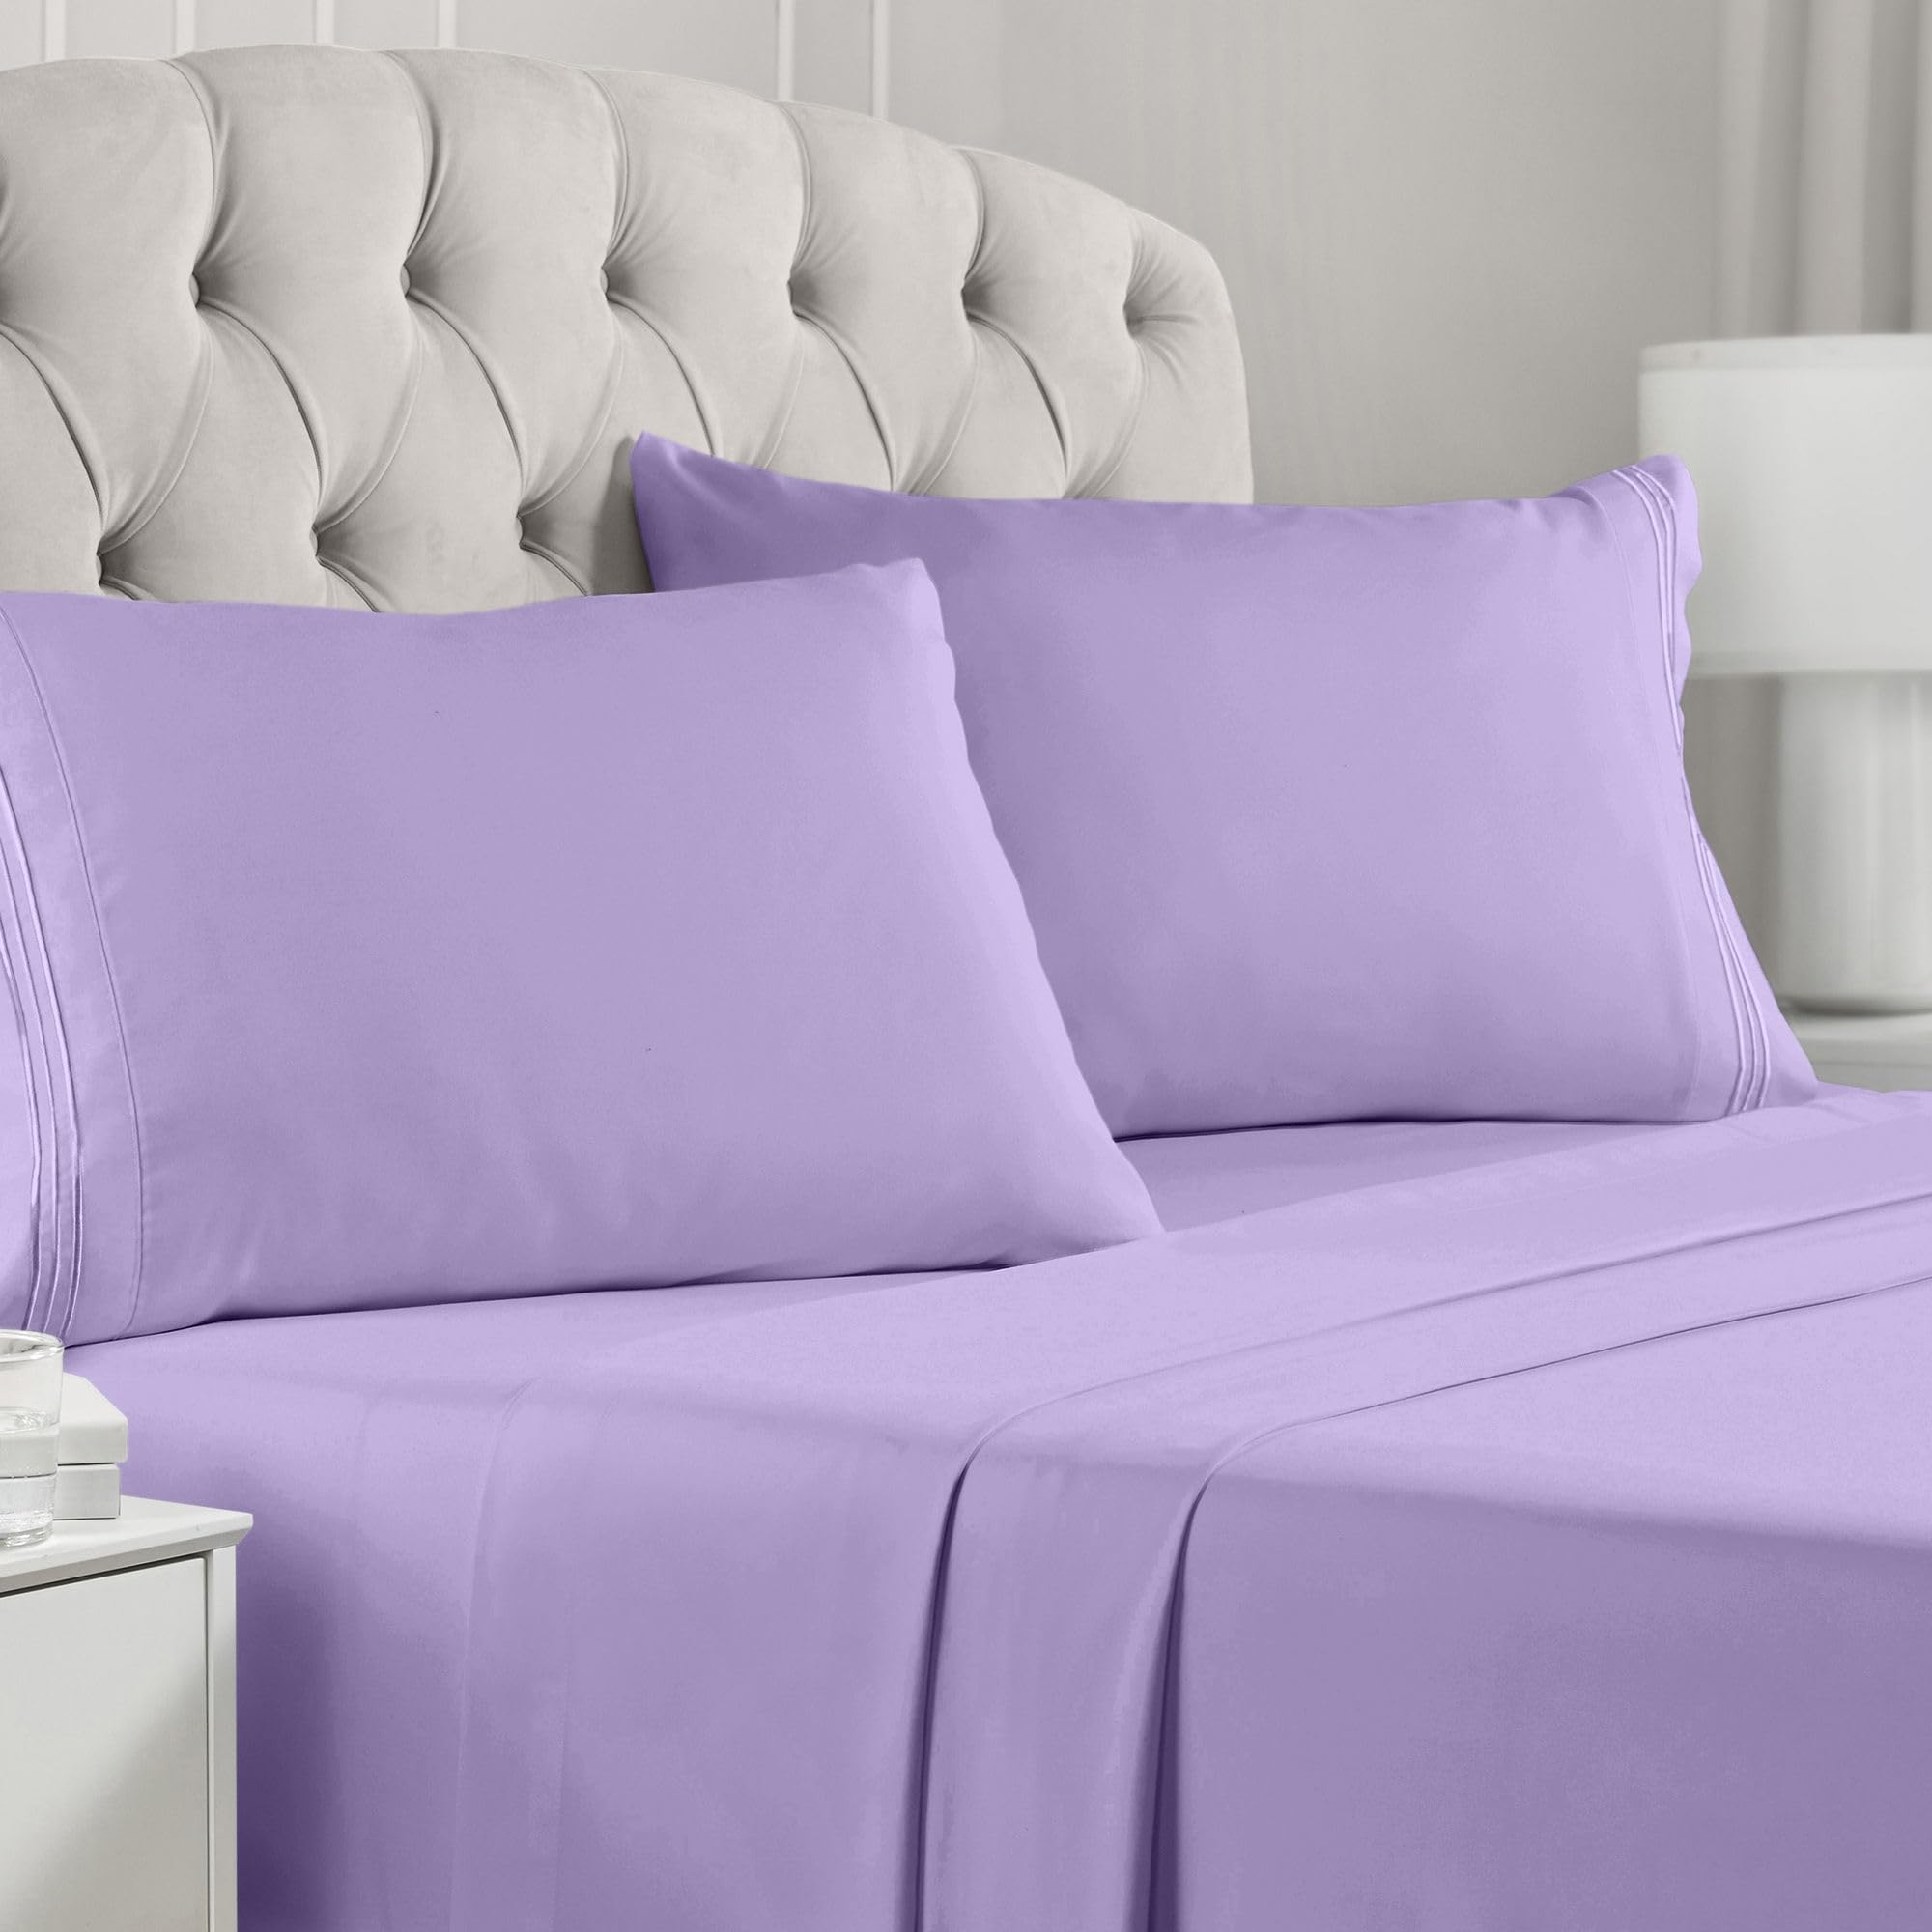 Book Cover Mellanni California King Sheet Set - 4 Piece Iconic Collection Bedding Sheets & Pillowcases - Hotel Luxury, Extra Soft, Cooling Bed Sheets - Deep Pocket up to 16 inch - Easy Care (Cal King, Violet) California King Violet